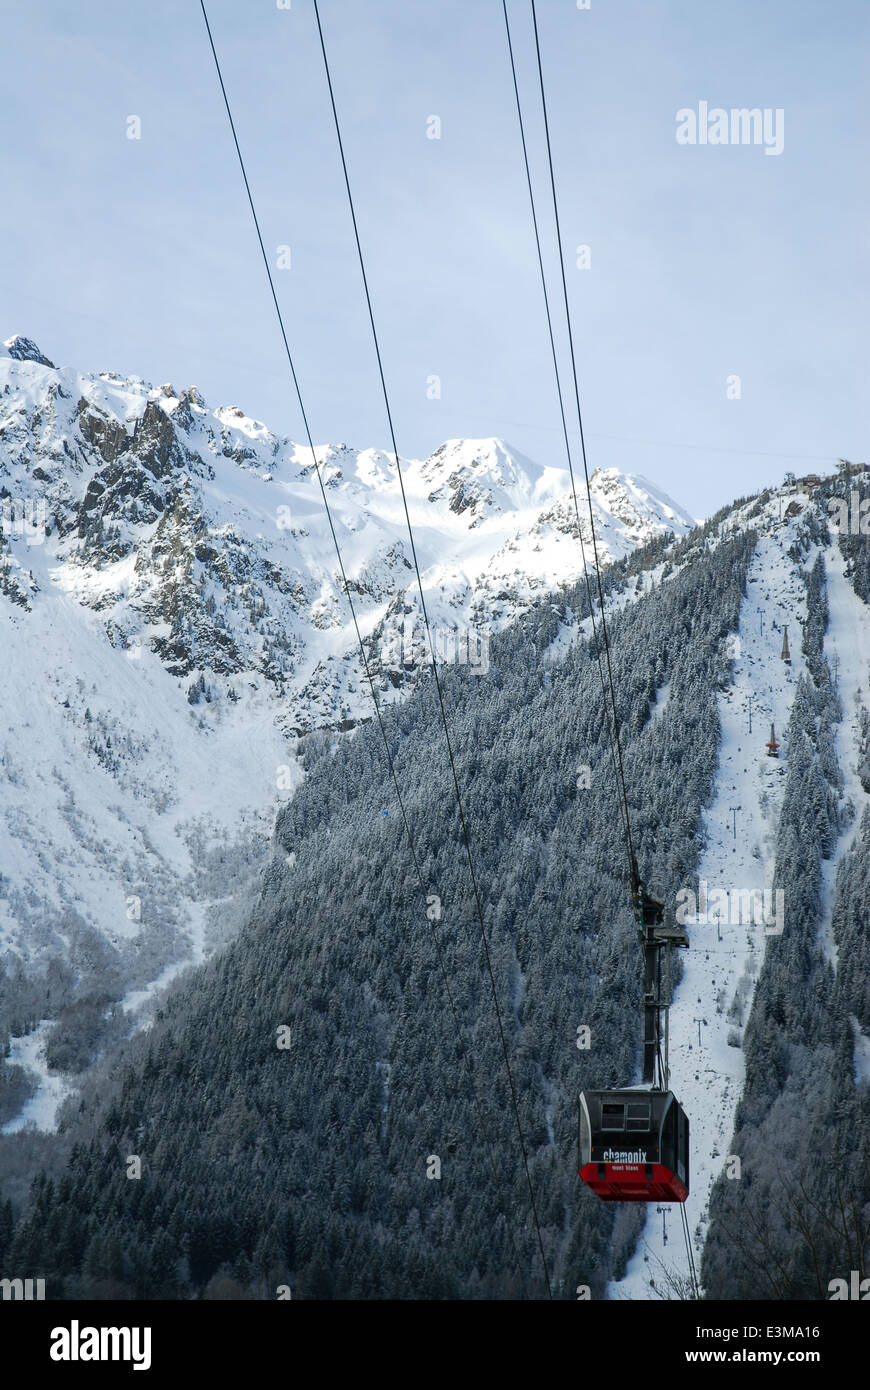 The cable car of the Aiguille du Midi in Chamonix, France: the highest vertical ascent cable car in the world. Stock Photo